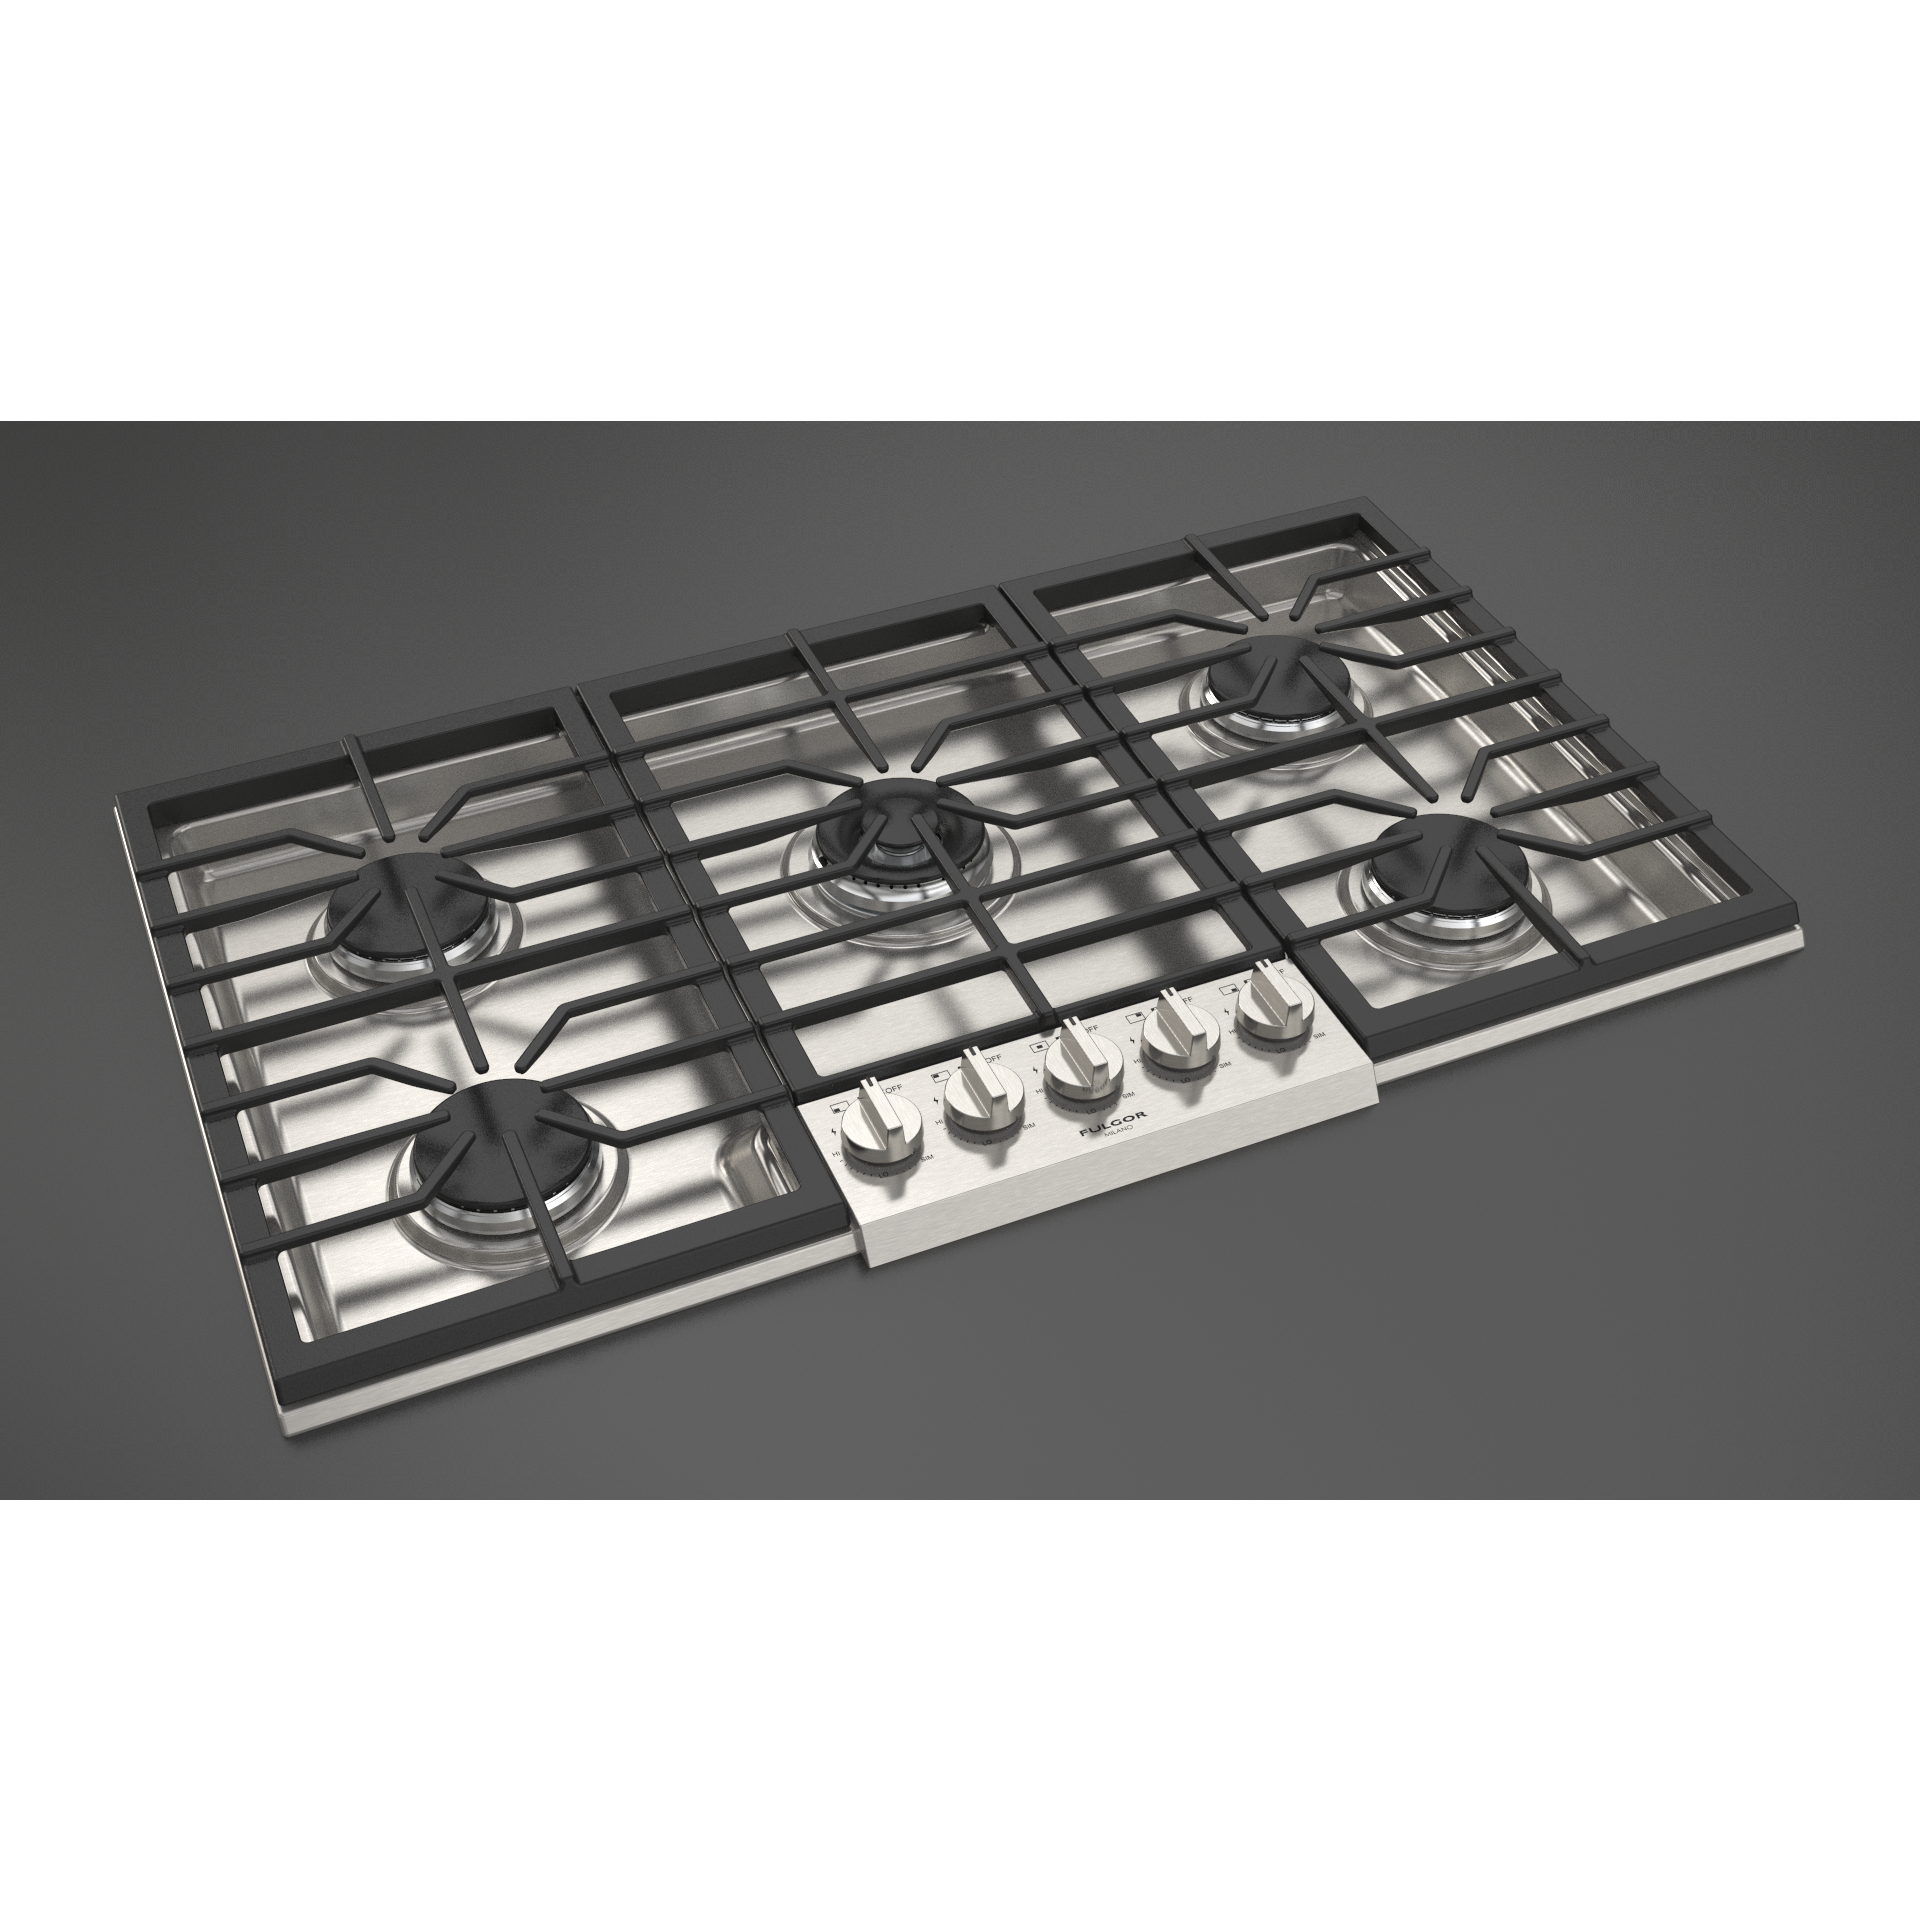 Fulgor Milano 36" Pro-Style Natural Gas Cooktop with 1 Central Dual Burner - F4PGK365S1